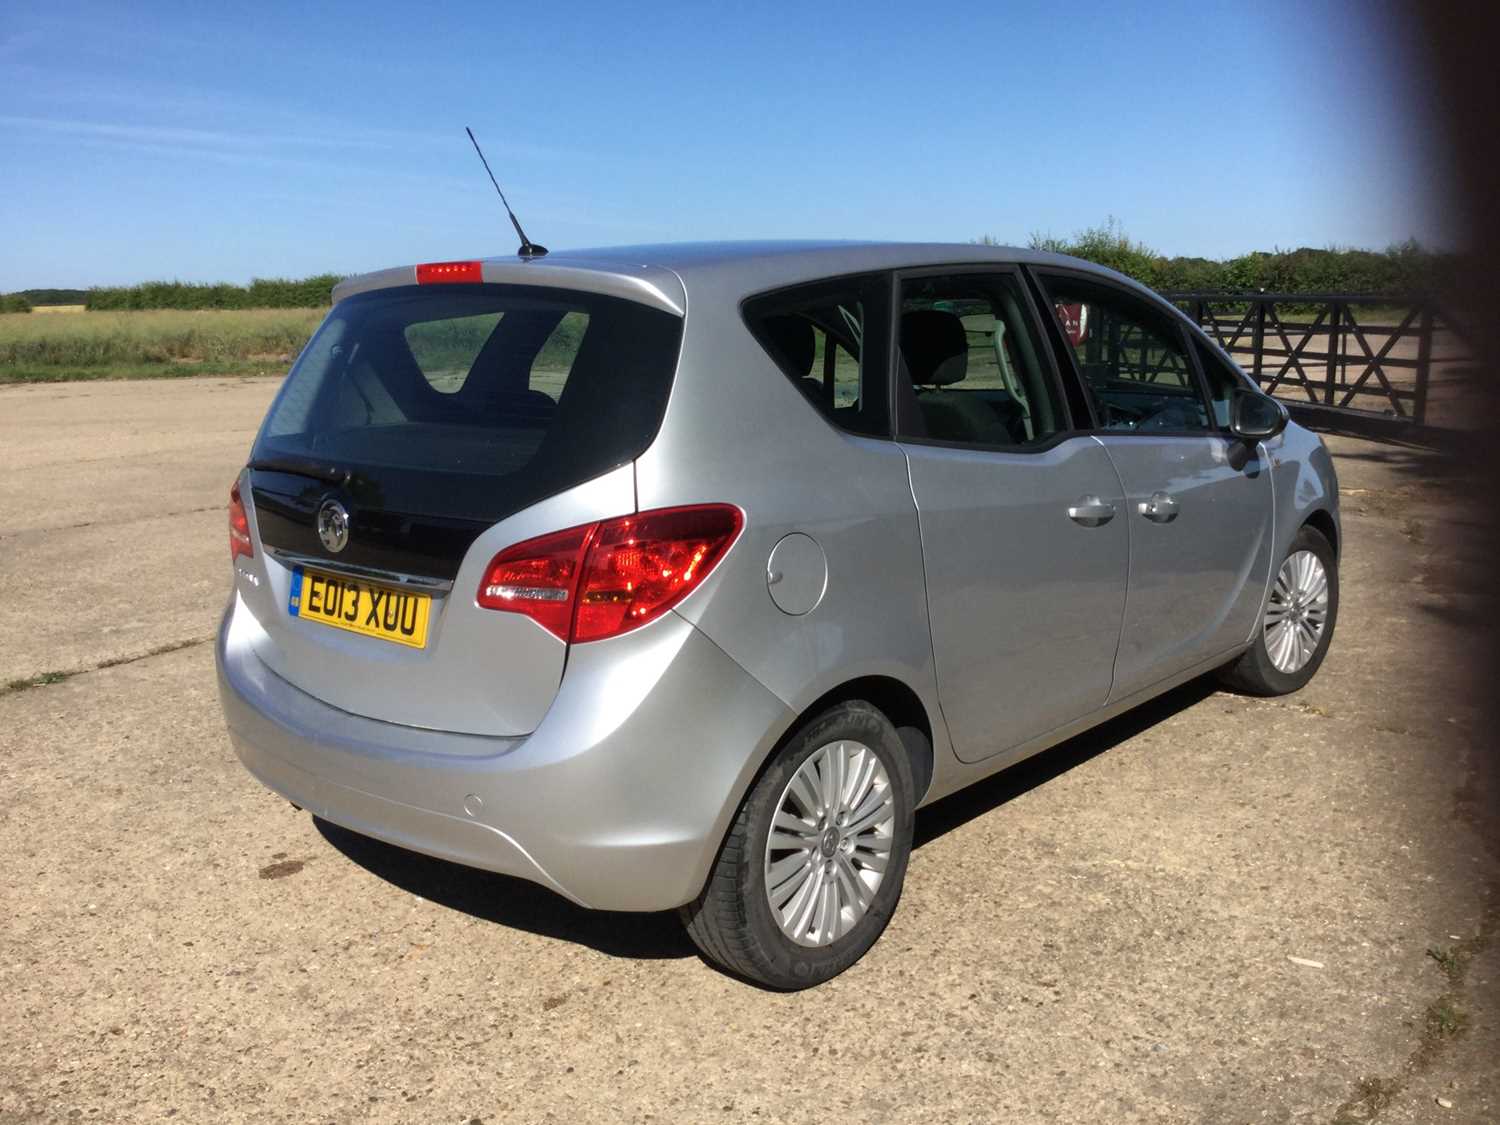 2013 Vauxhall Meriva 1.4i 16v Energy 5dr, manual, Reg. No. EO13 XUU, finished in silver. - Image 7 of 16